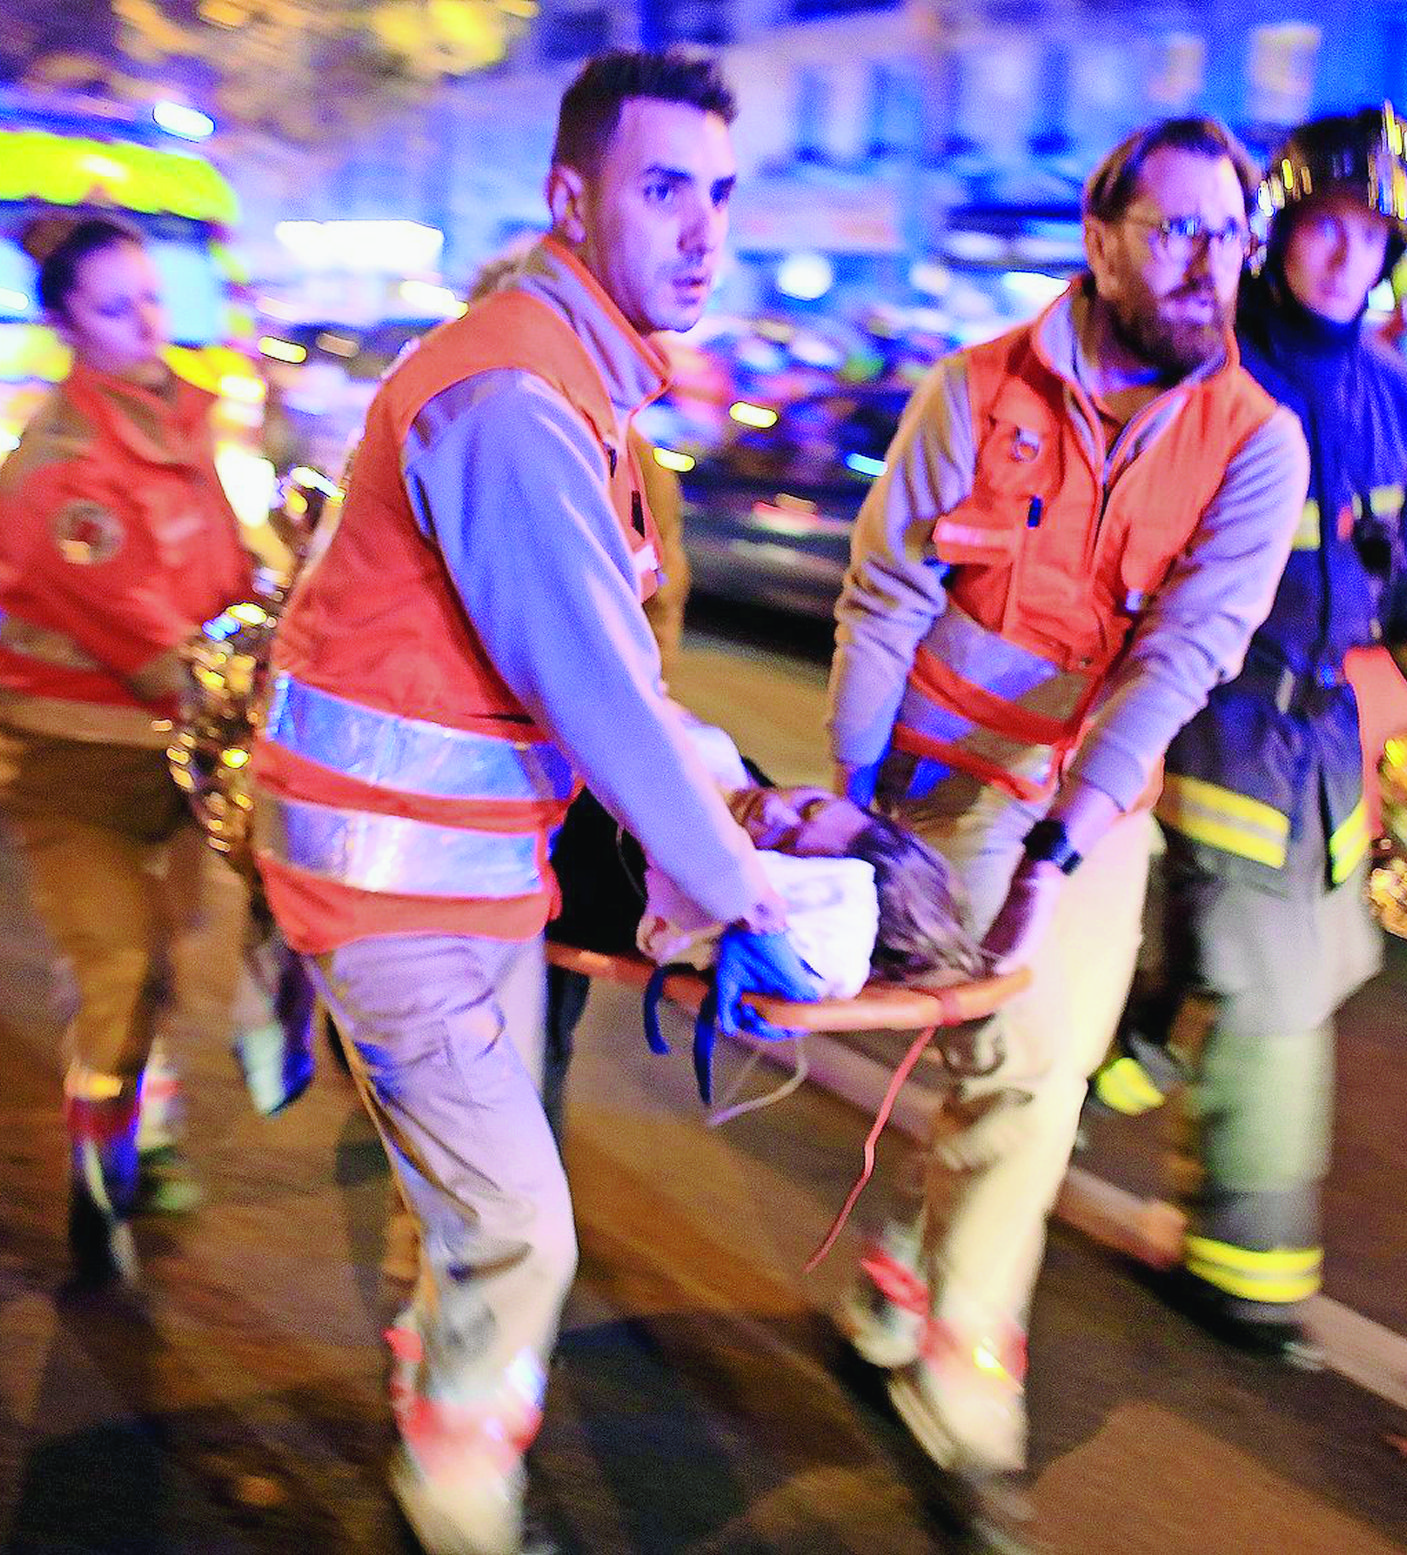 FILE - In this Nov.13, 2015 file photo, a woman is being evacuated from the Bataclan concert hall after a shooting in Paris. All the attackers and accomplices so far identified were raised in Europe, native French speakers with roots in the marginalized immigrant communities of France and Belgium. Minor players, like the man who rented a room to the attacks' mastermind, Abdelhamid Abaaoud, have a degree or two of separation in an underworld of drugs, fraud and theft. (AP Photo/Thibault Camus, File) FRANKREICH TERRORISMUS ANSCHLAEGE PARIS